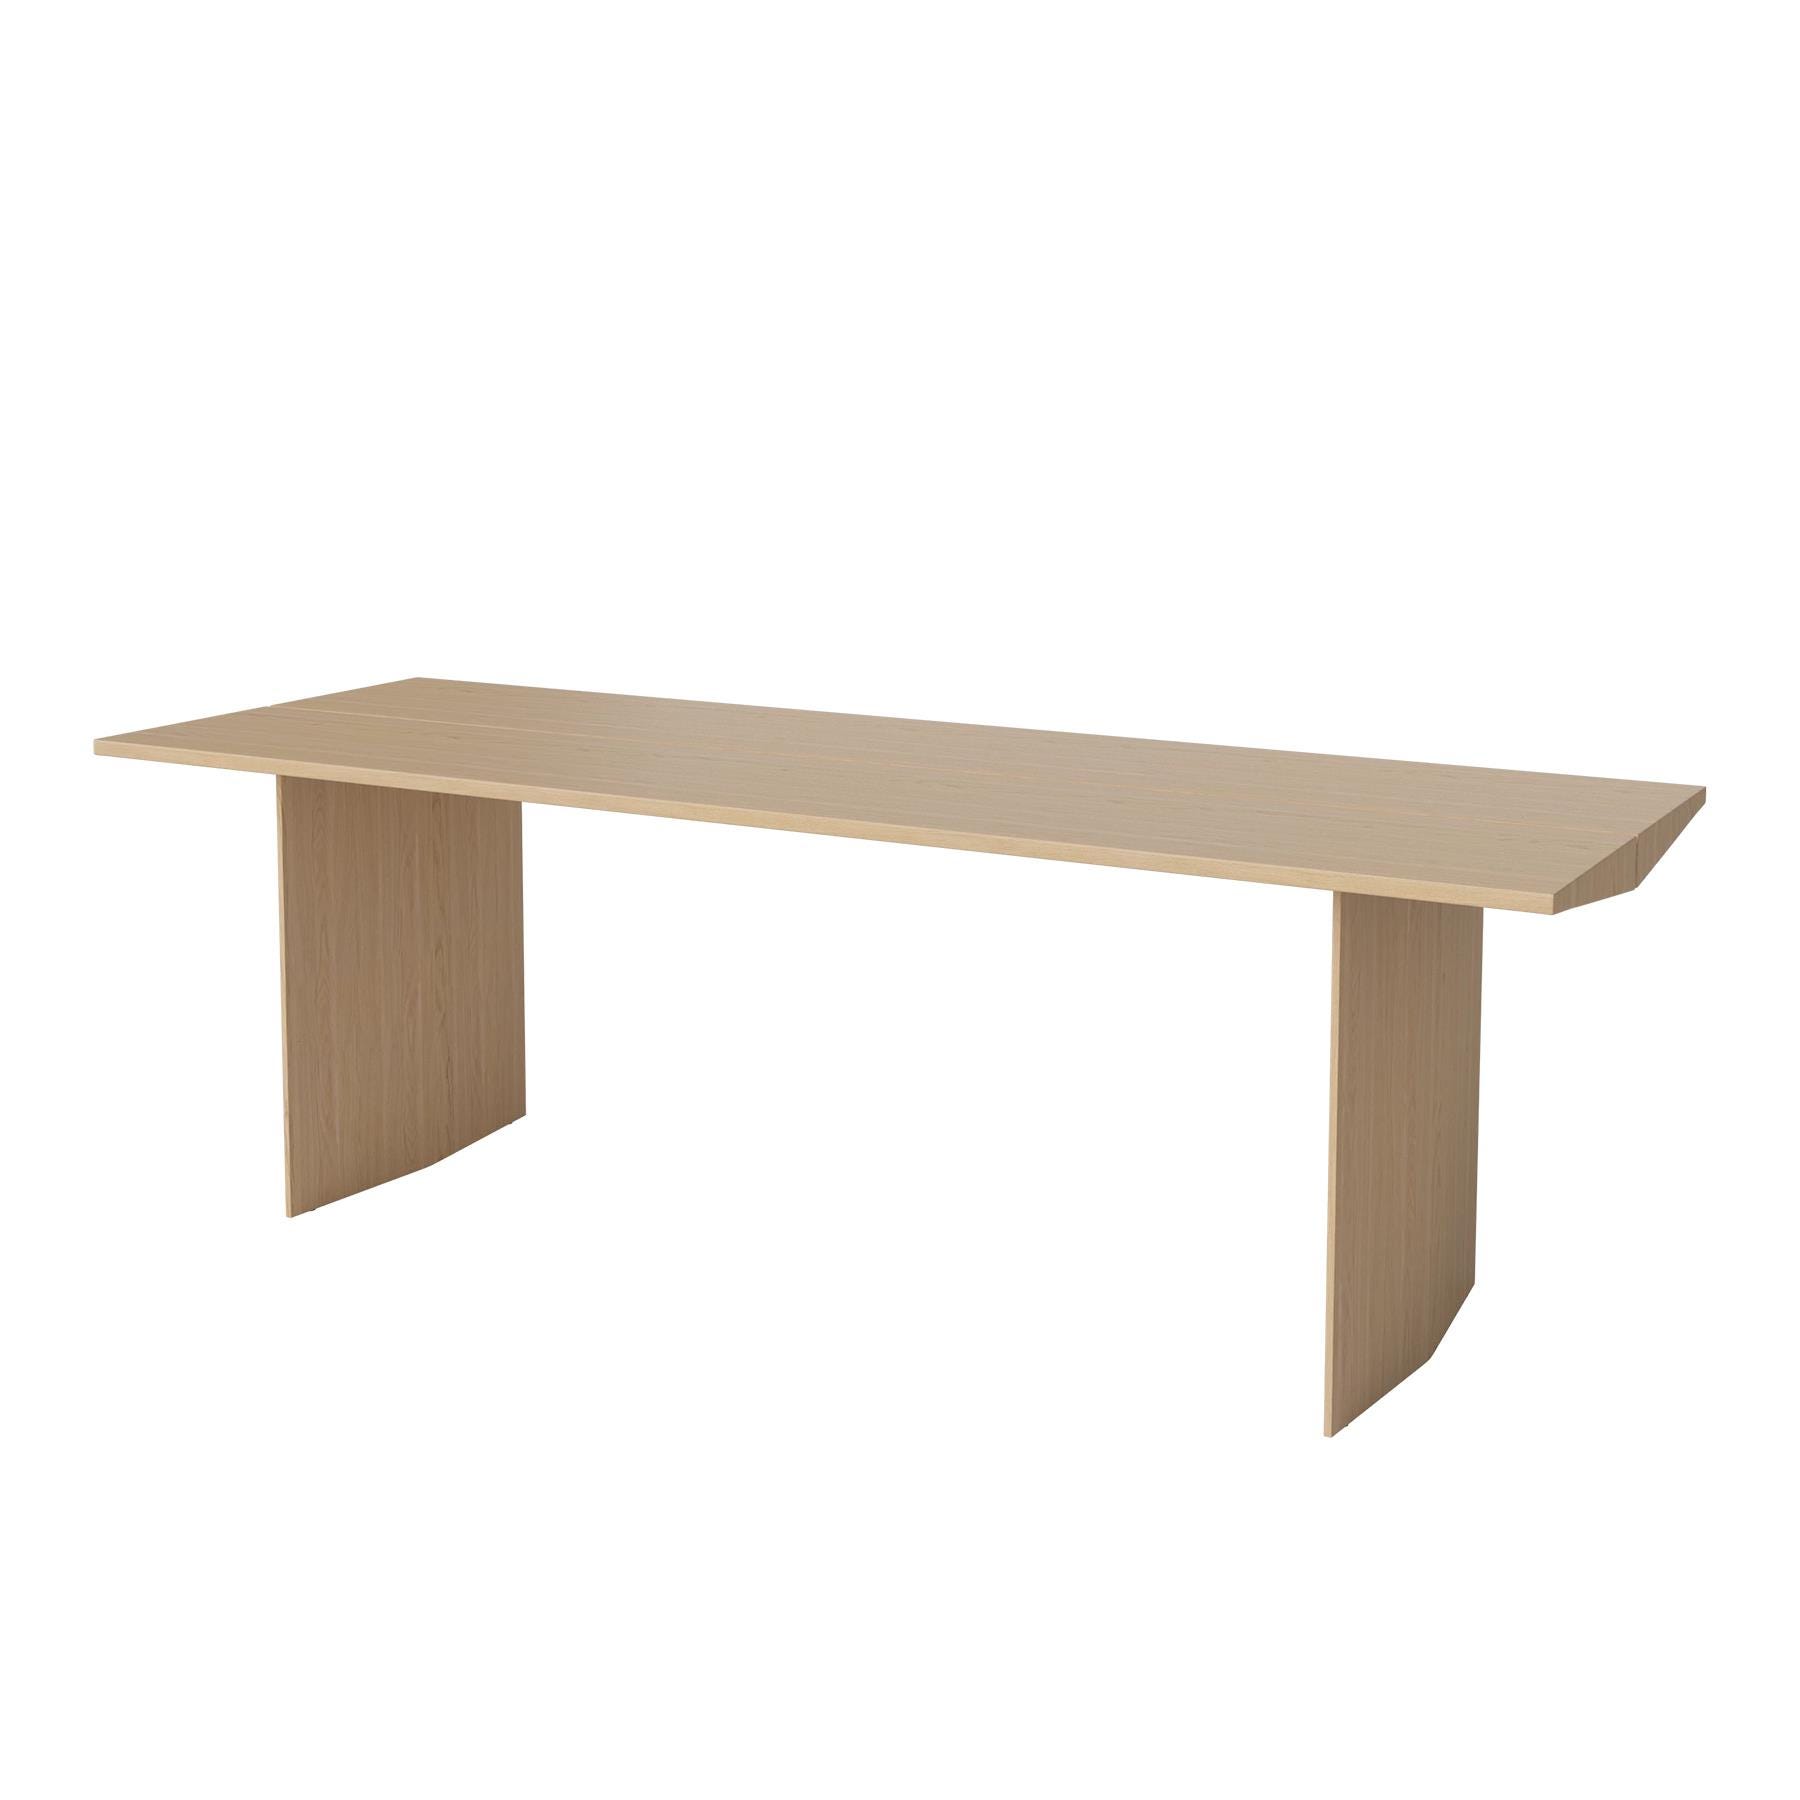 Bolia Alp Dining Table White Oiled Oak Lenghth 260cm Light Wood Designer Furniture From Holloways Of Ludlow